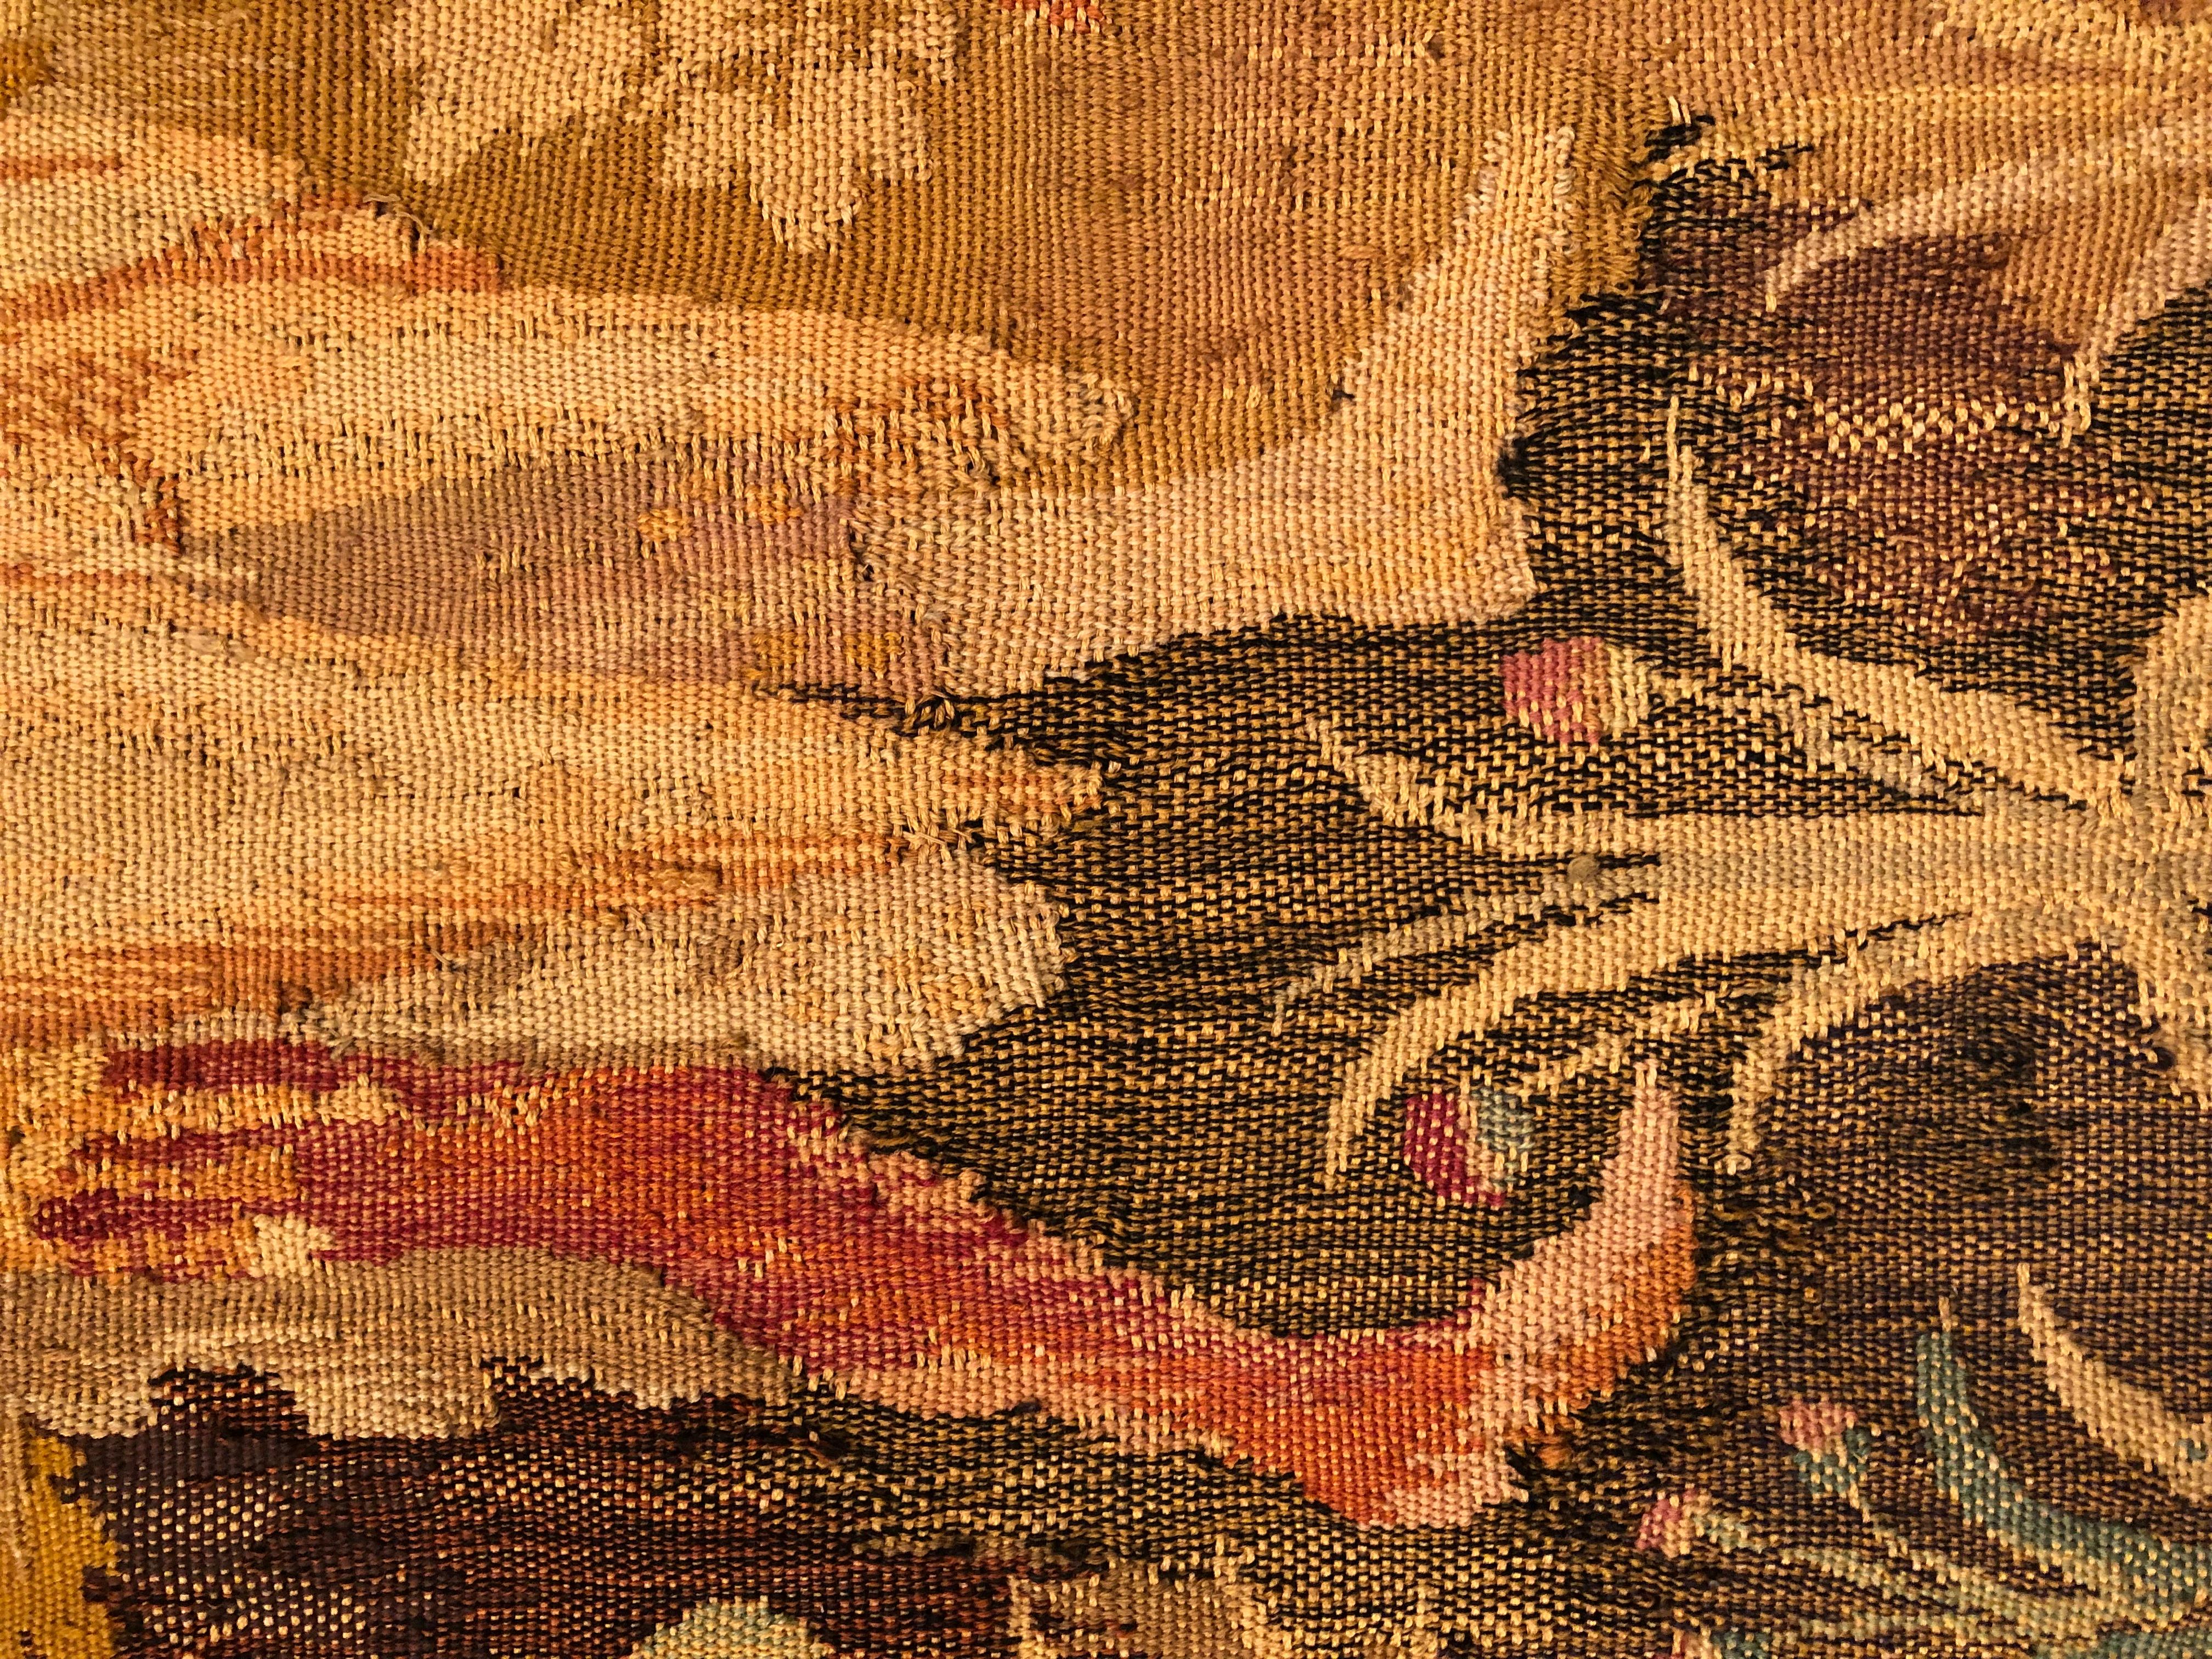 Gorgeous Intricately Detailed 19th Century Tapestry in Warm Autumn Tones For Sale 8